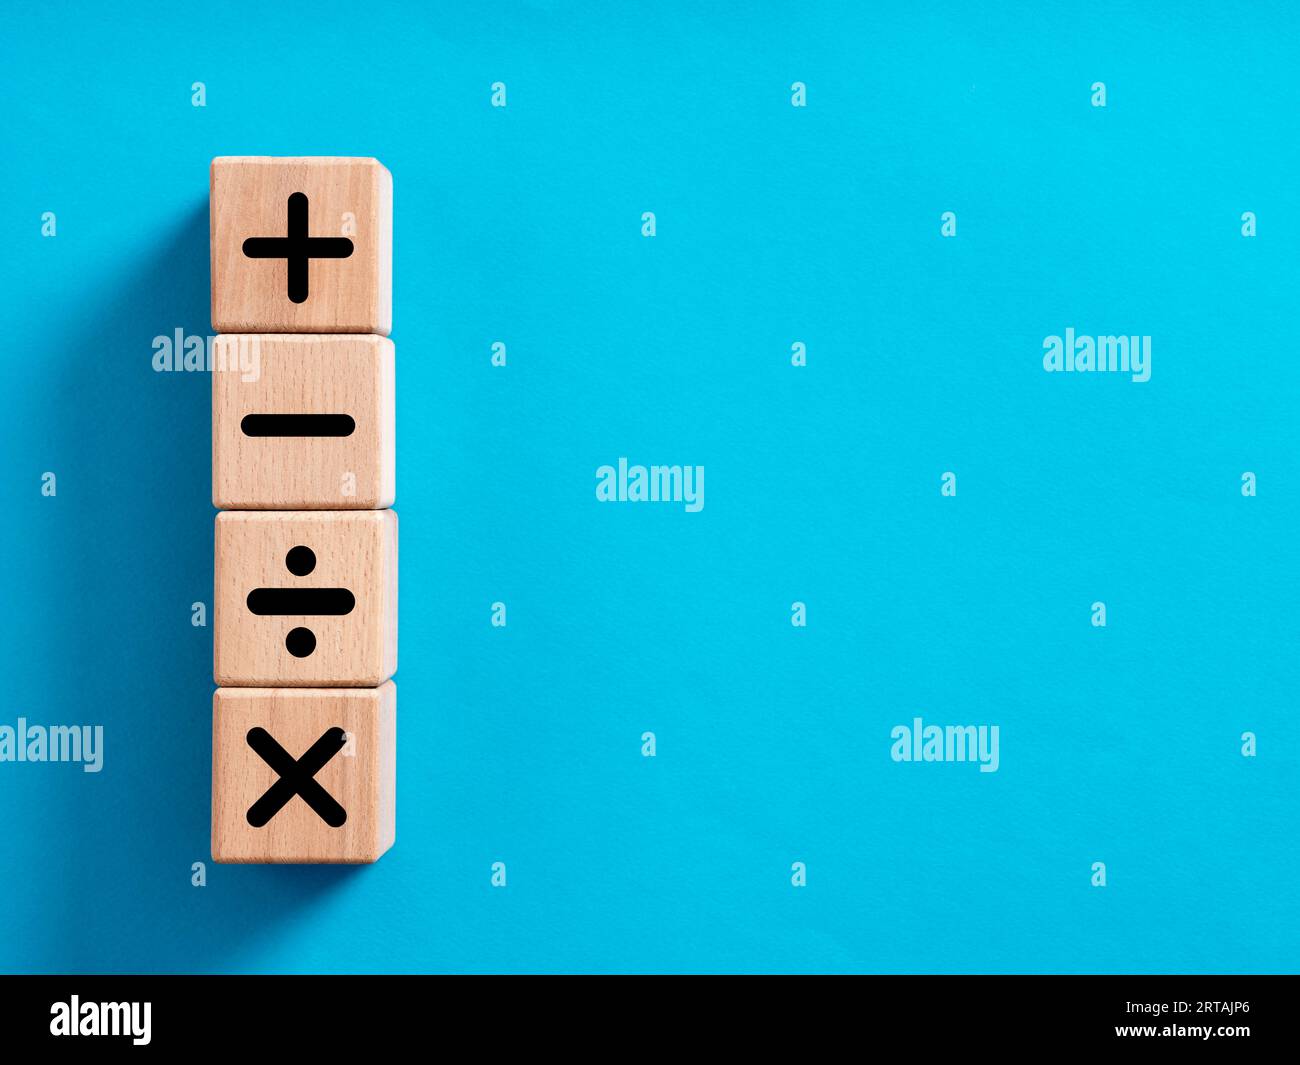 Basic mathematical operations symbols. Plus, minus, multiply and divide symbols on wooden cubes. Mathematic or math education and basic calculations f Stock Photo